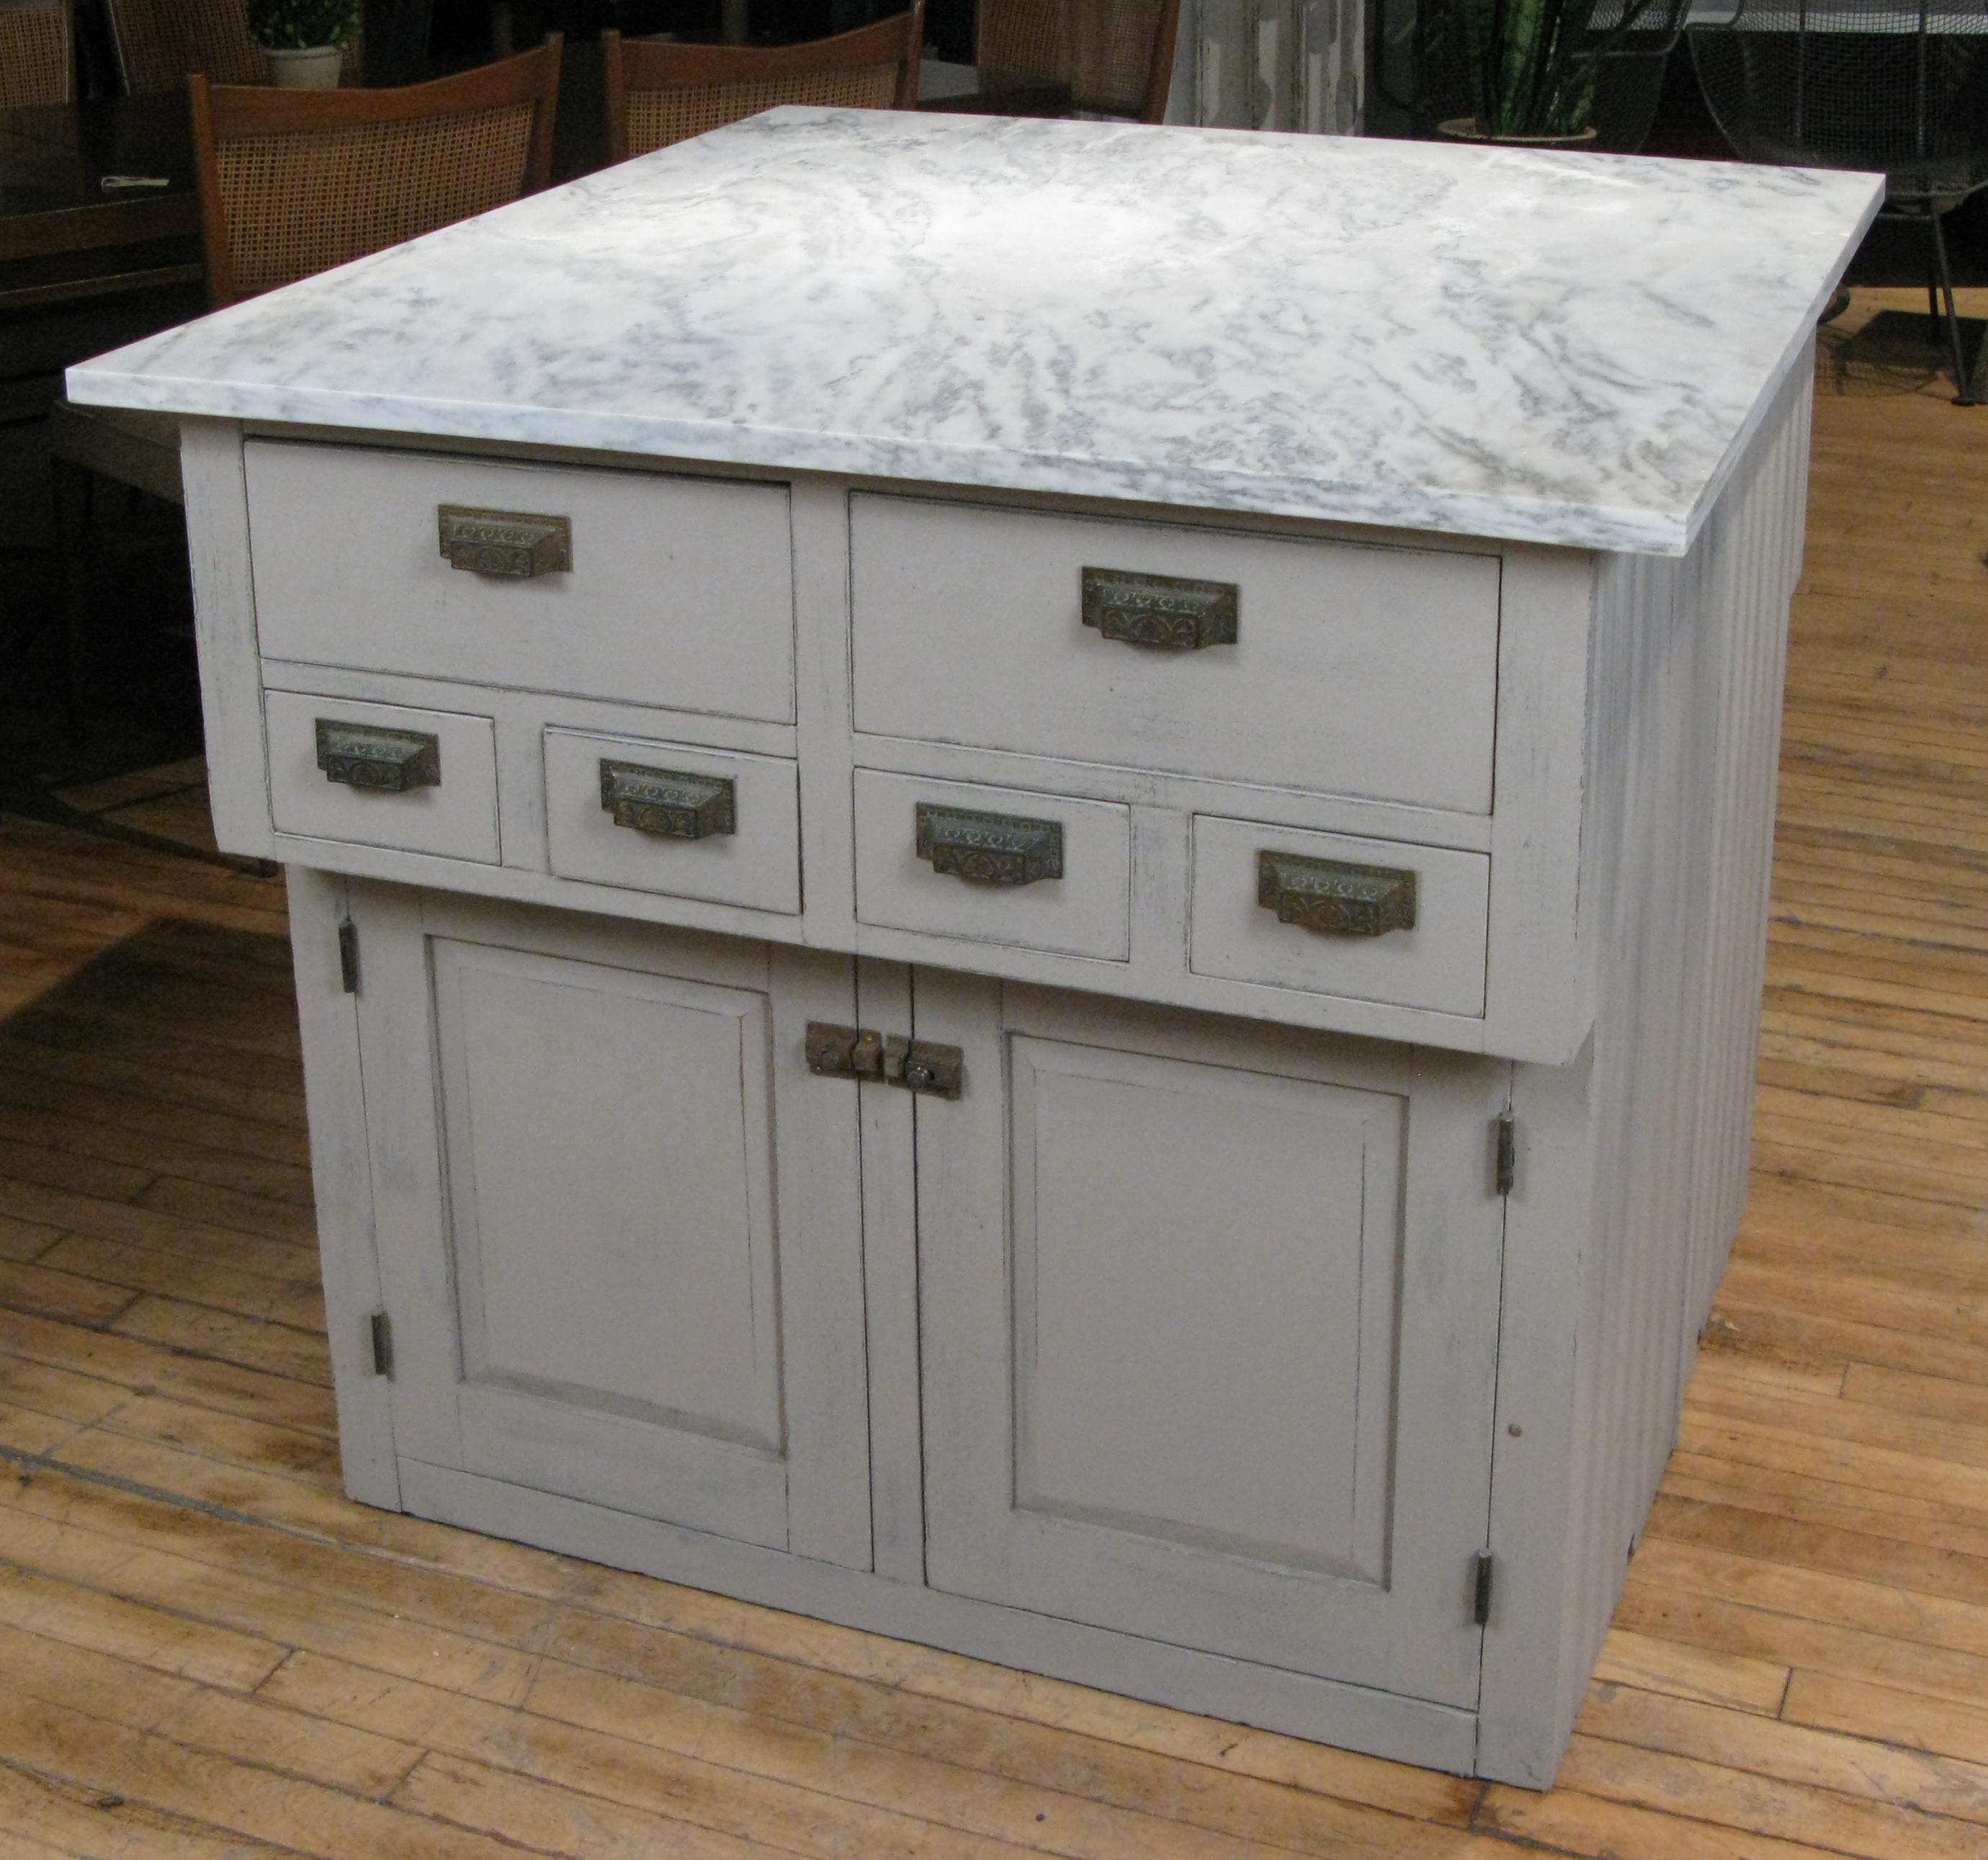 A very handsome vintage oak kitchen storage island, with an antique marble top. the matching pair of cupboards (placed back to back in the pictures) each have the same configuration of six drawers above and then stepped slightly back below there are